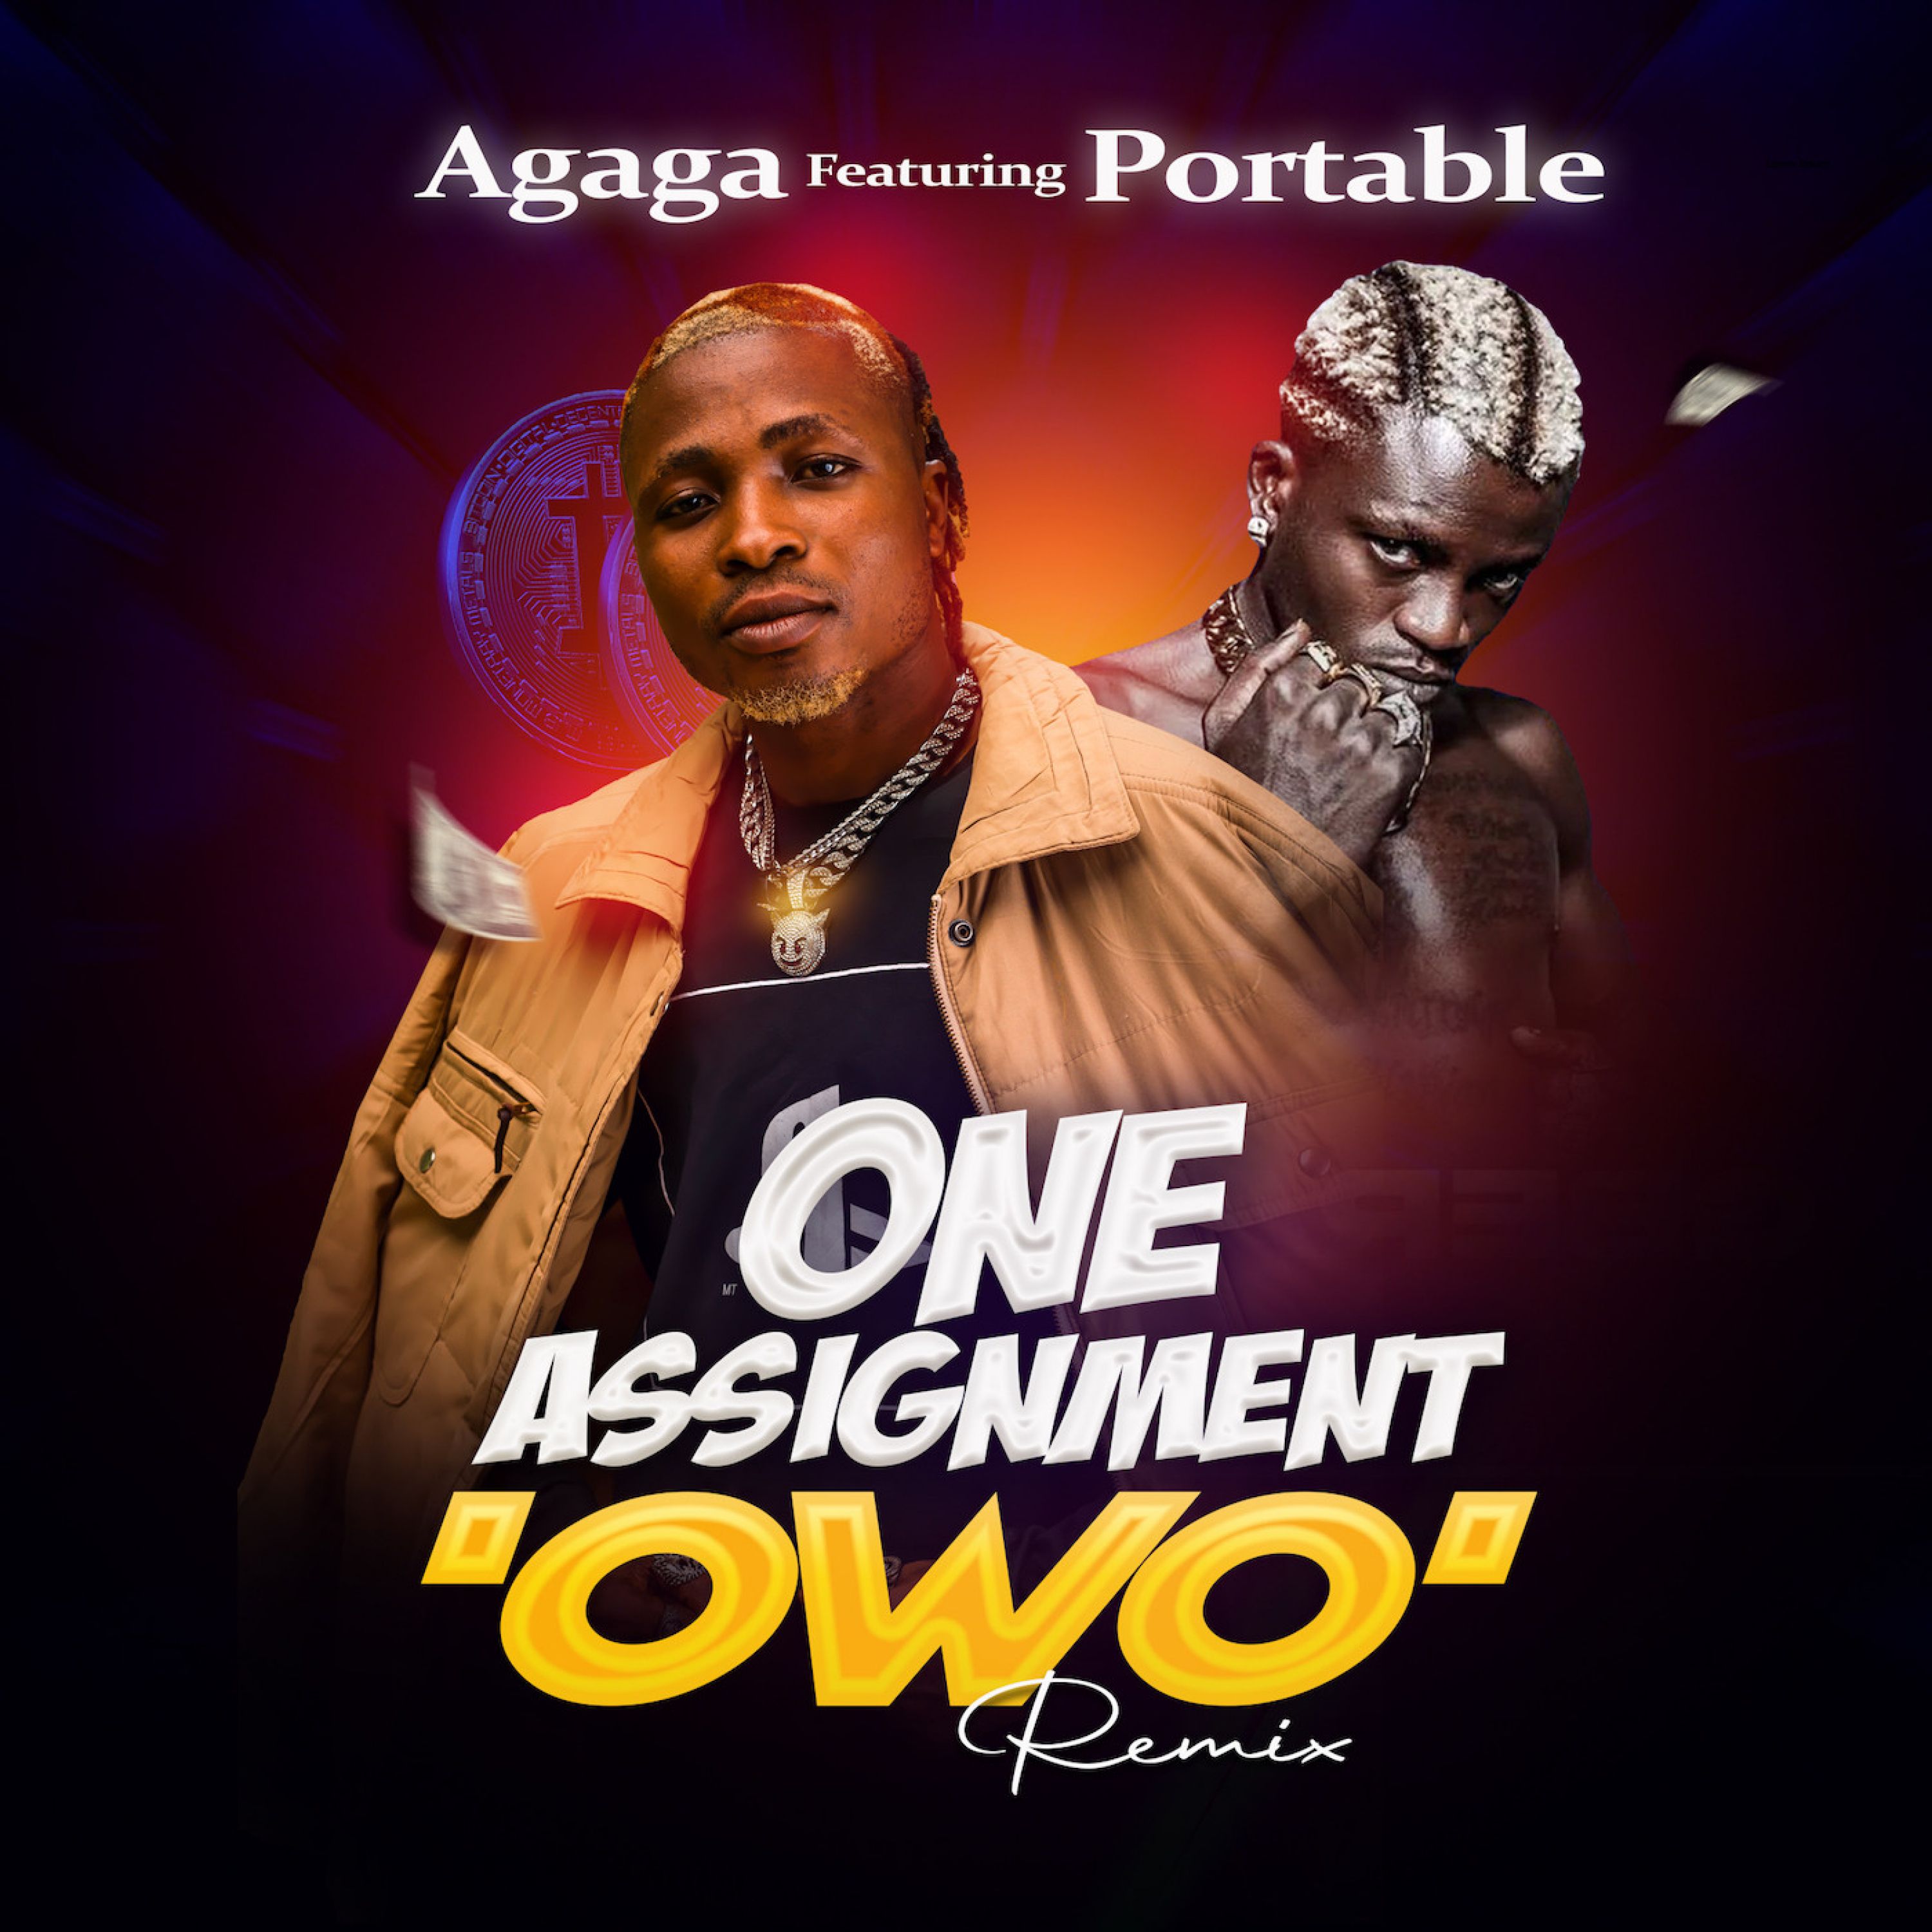 Agaga - One Assignment Owo (Remix) Ft. Portable